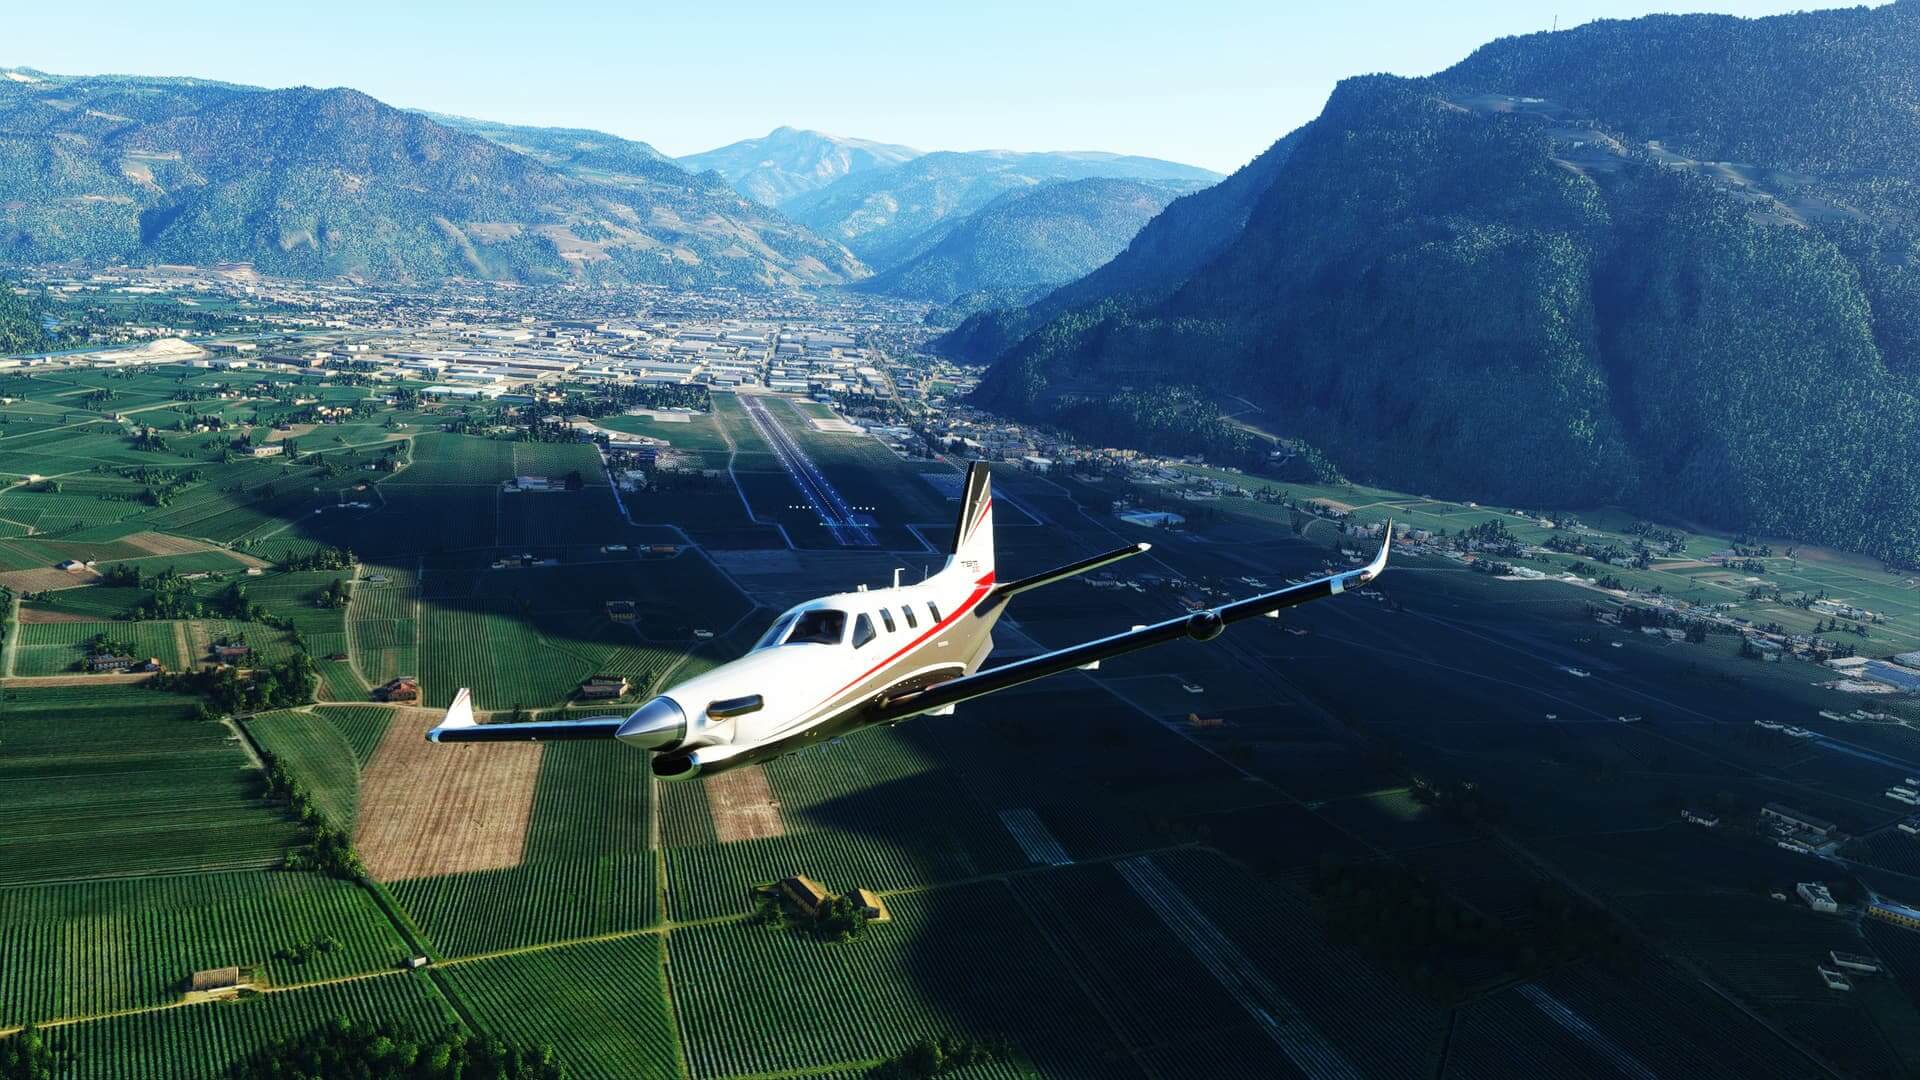 A TBM 930 banks left after taking off from an airport in a valley.